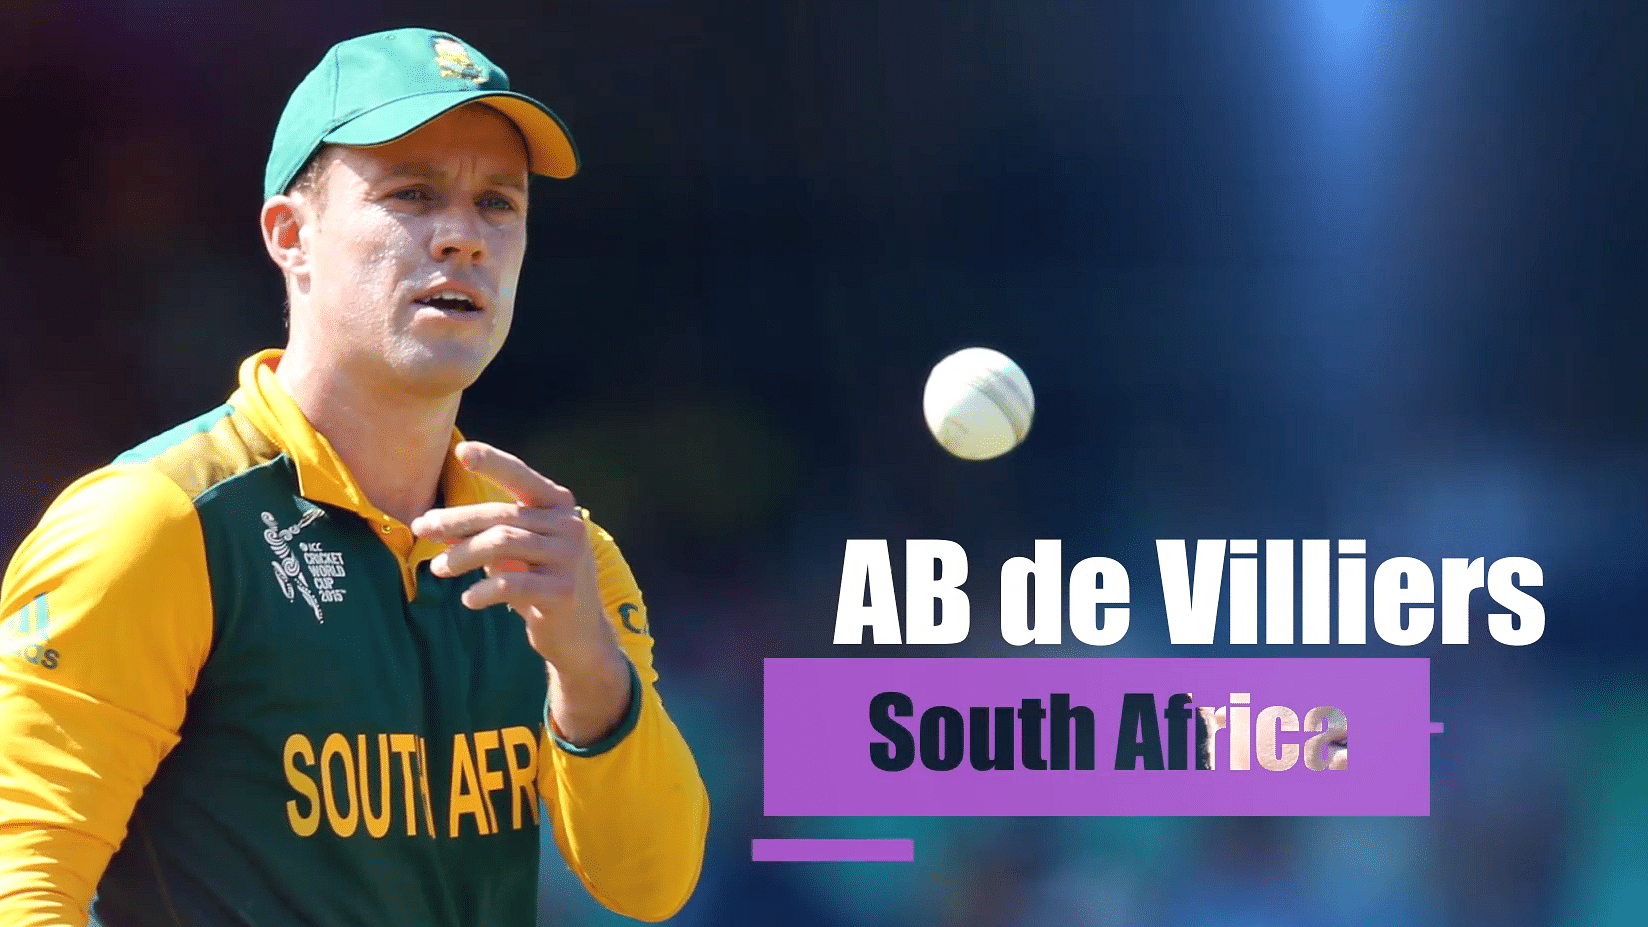 Just talking statistics, AB de Villiers is not a threat to India in the T20 series. Here’s why